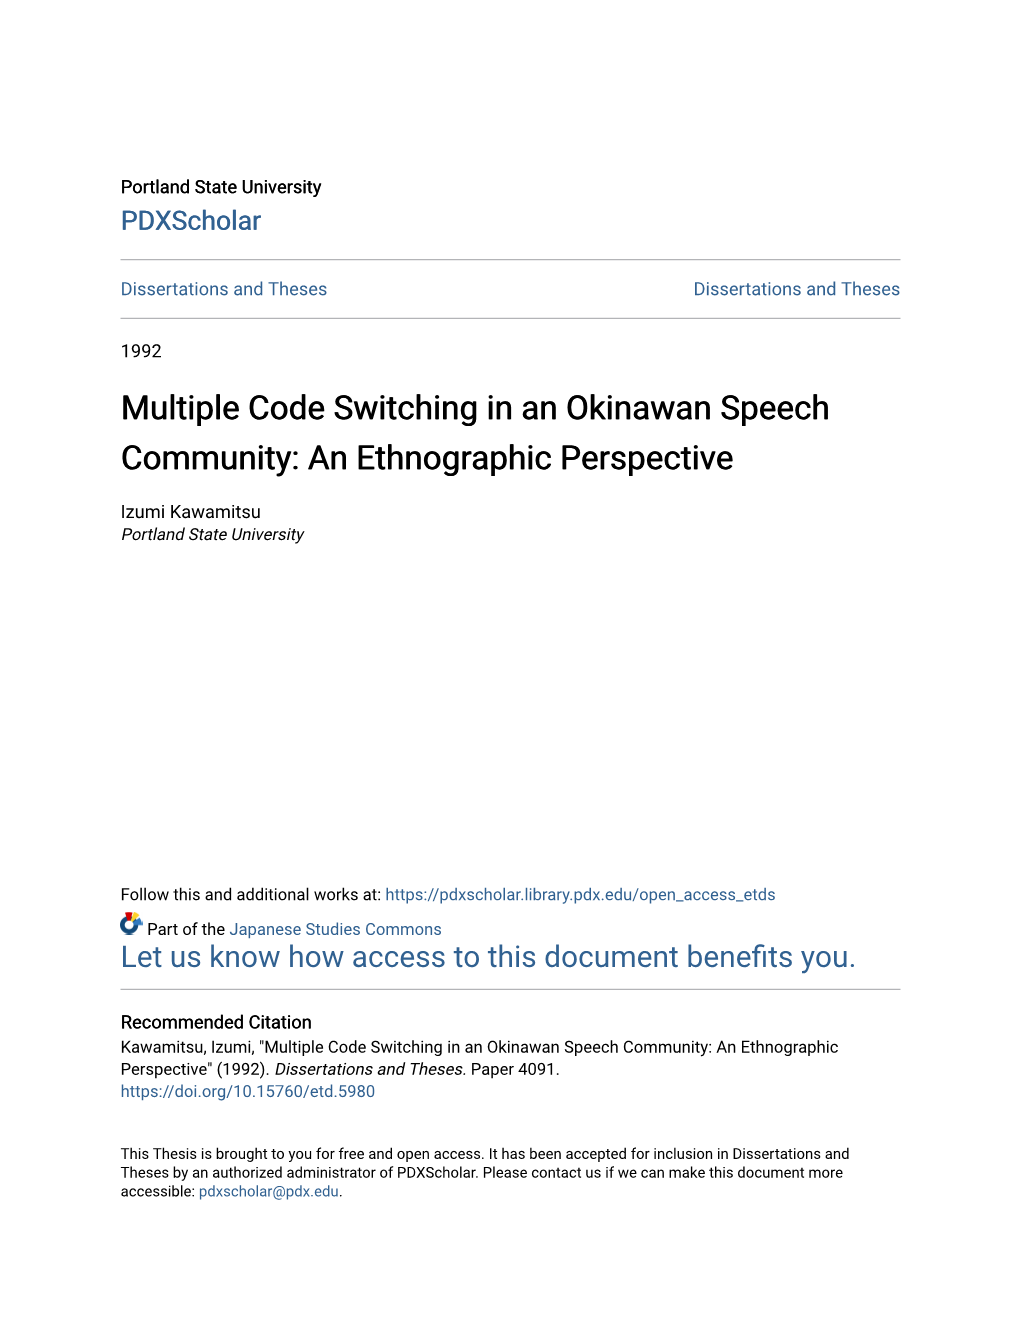 Multiple Code Switching in an Okinawan Speech Community: an Ethnographic Perspective